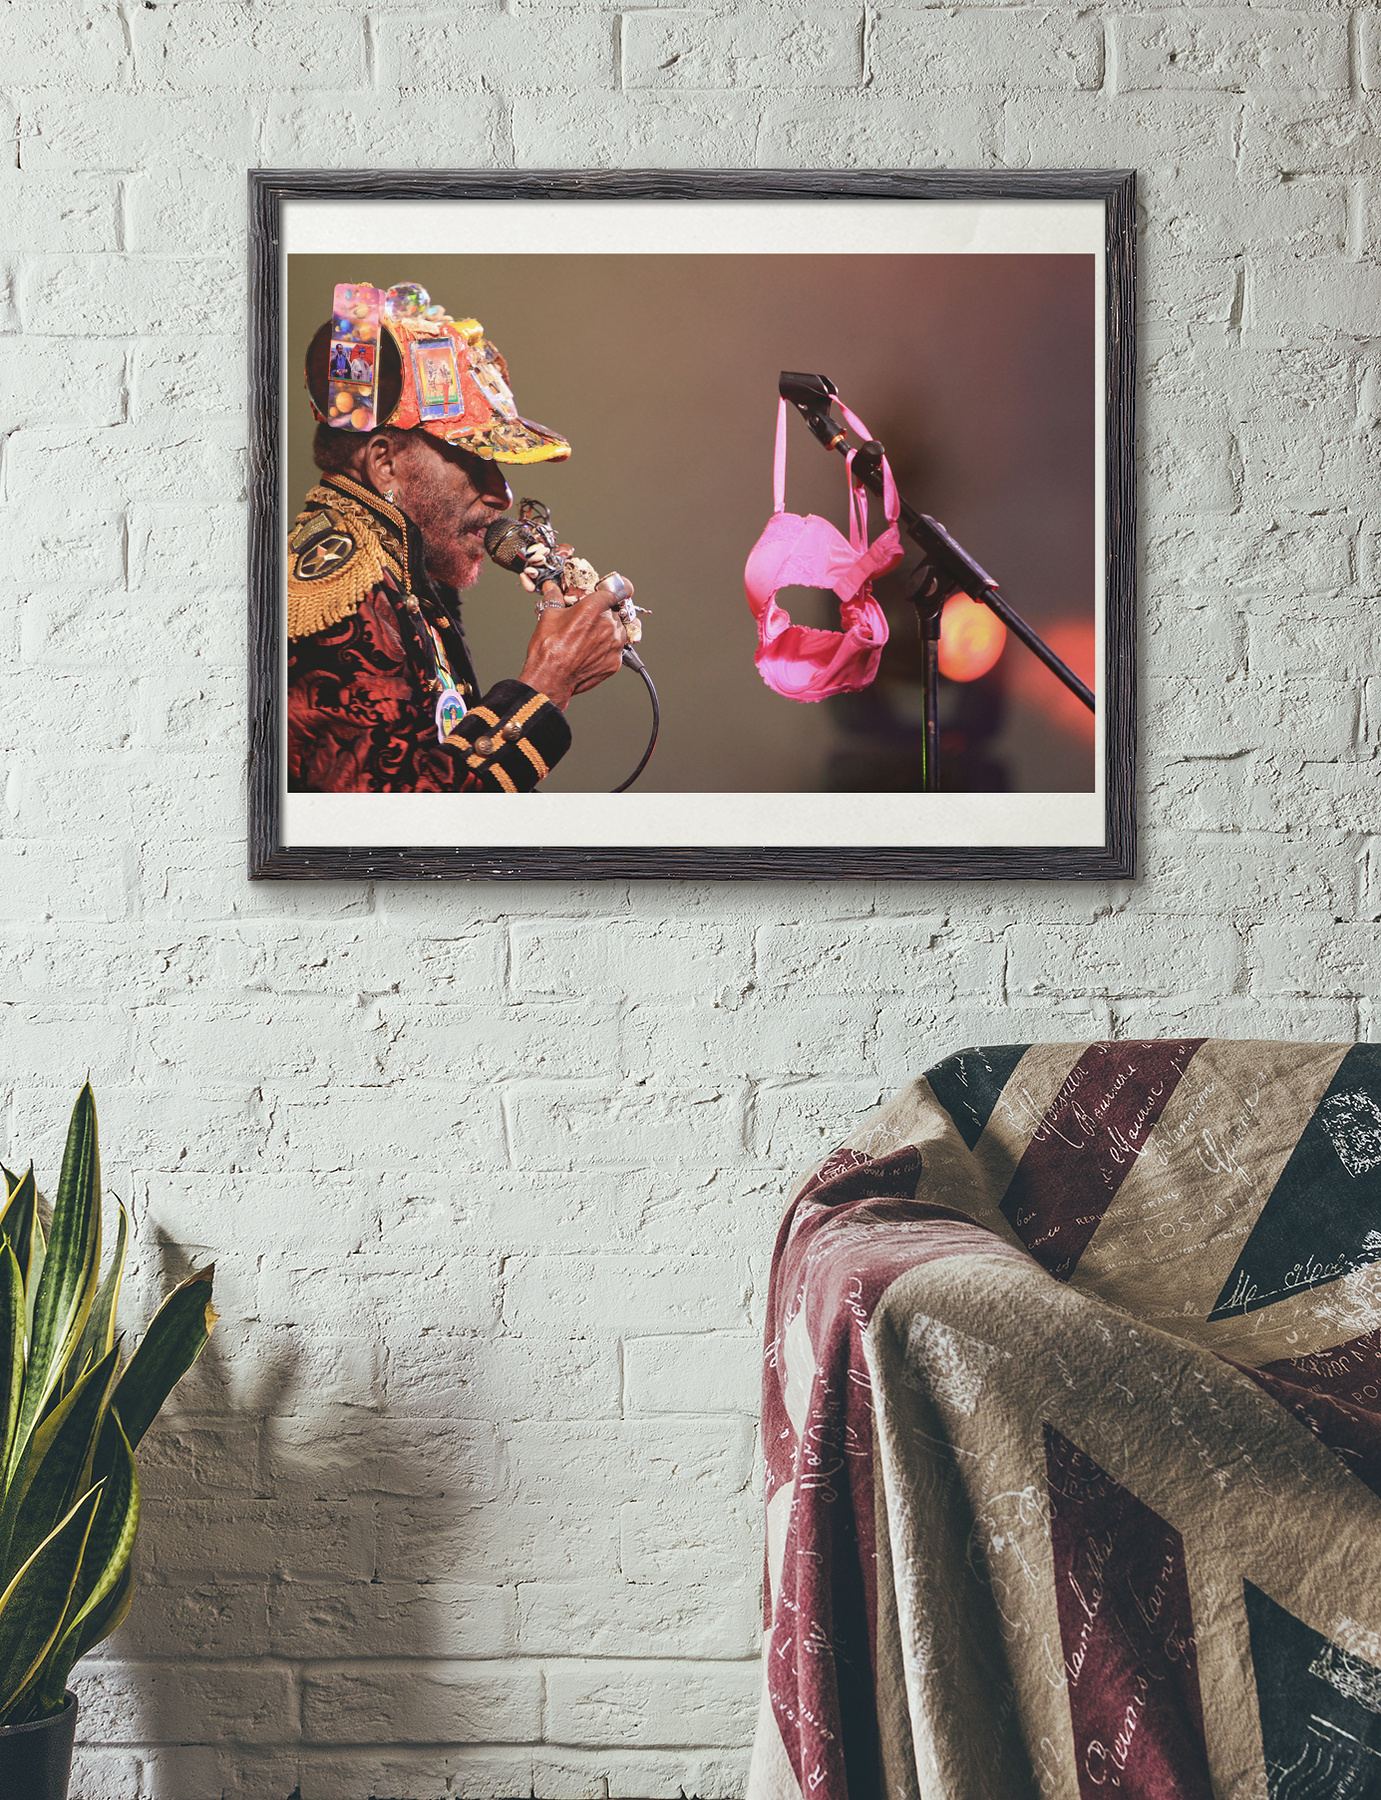 Lee Scratch Perry Live at Beat Herder 2012 (crowd throw their under wear at Lee Scratch Perry) by Michelle Heighway - photo paper poster